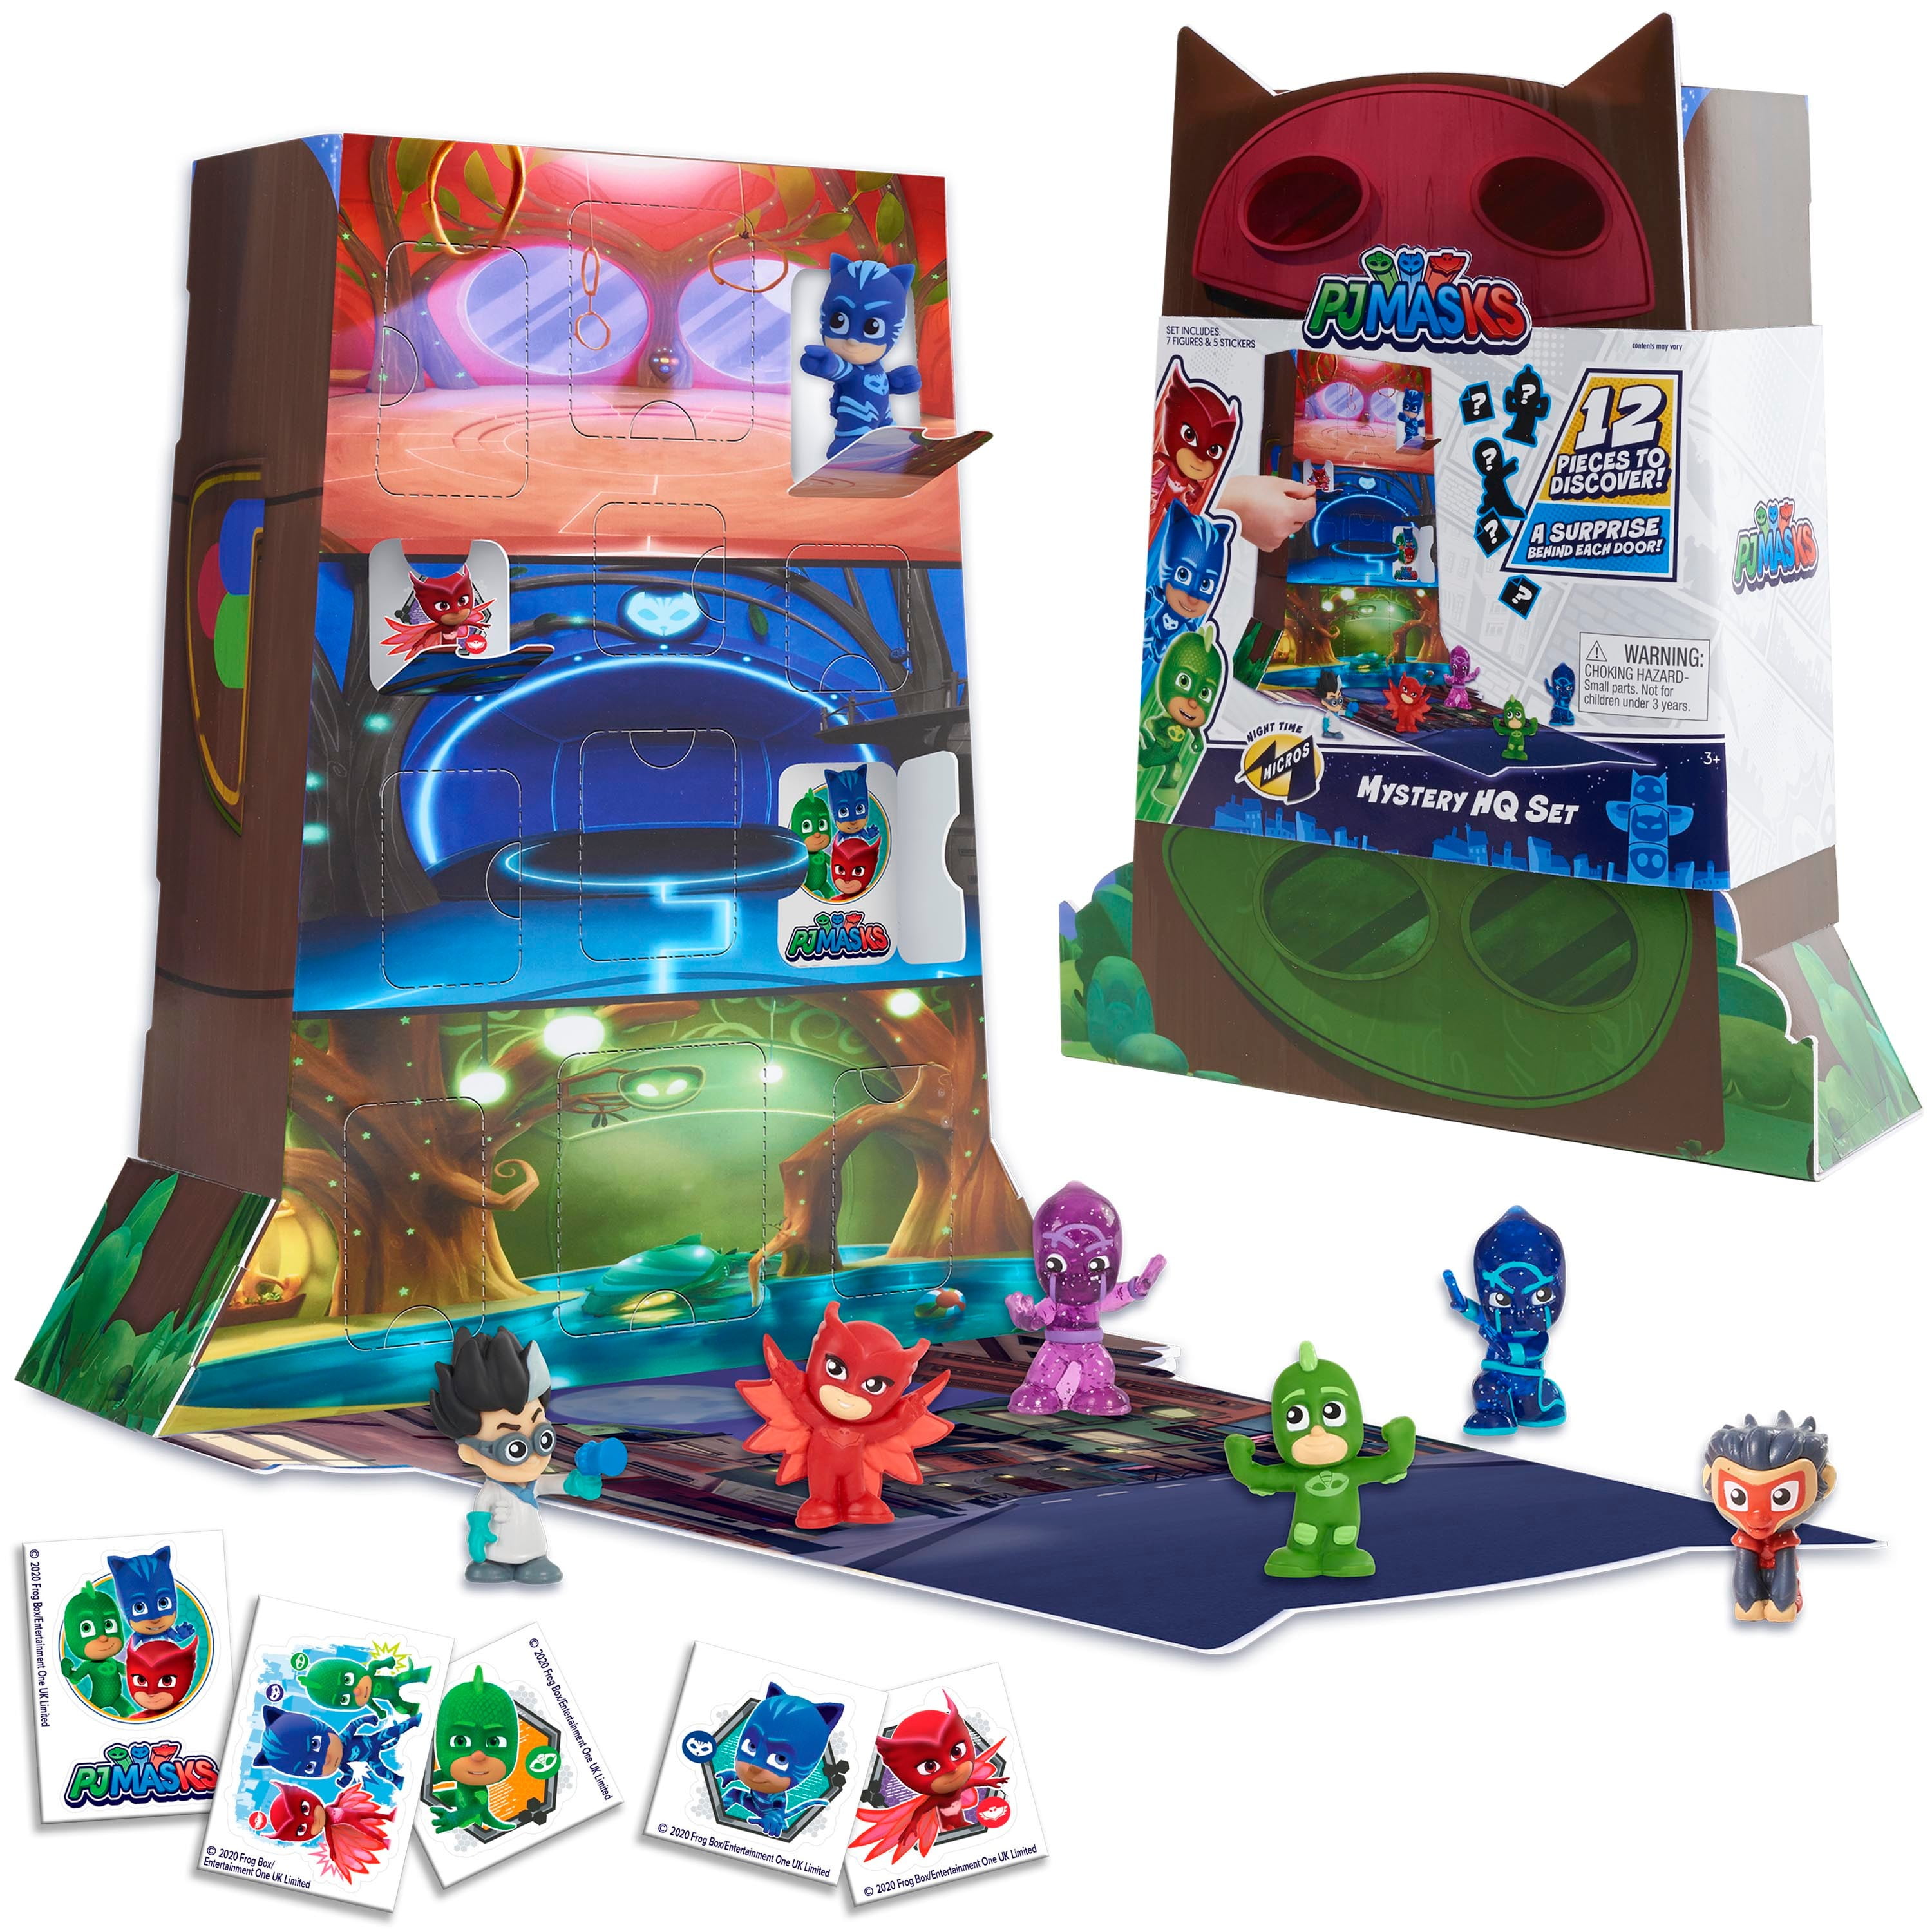 PJ Masks Night Time Micros Mystery HQ Box Set, Kids Toys for Ages 3 Up,  Gifts and Presents 